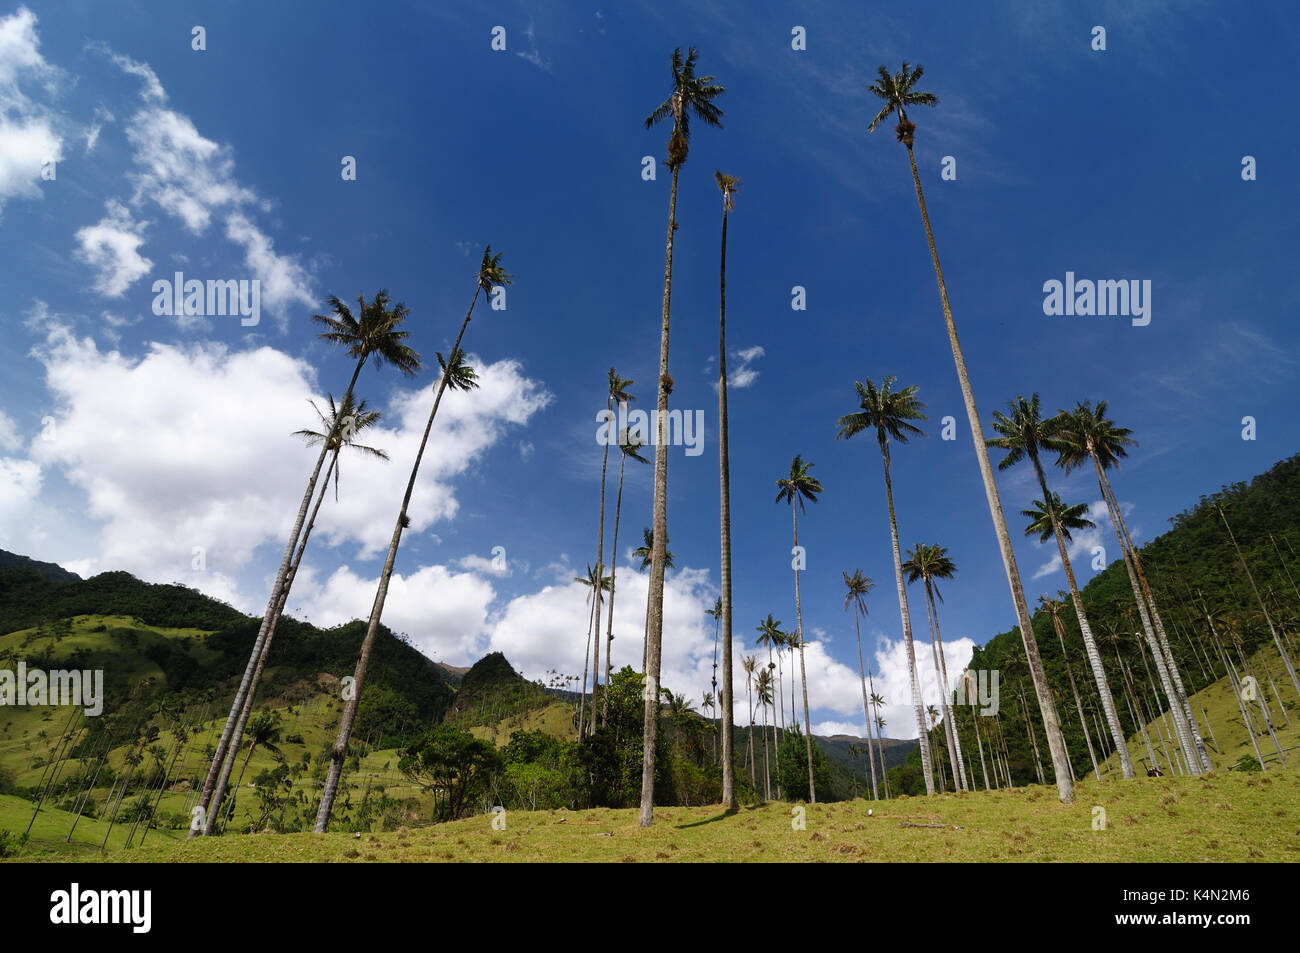 Colombia, Cocora valley near Salento has an enchanting landscape of pinies and eucalyptus towered over by the famous wax palms, Colombias national tre Stock Photo